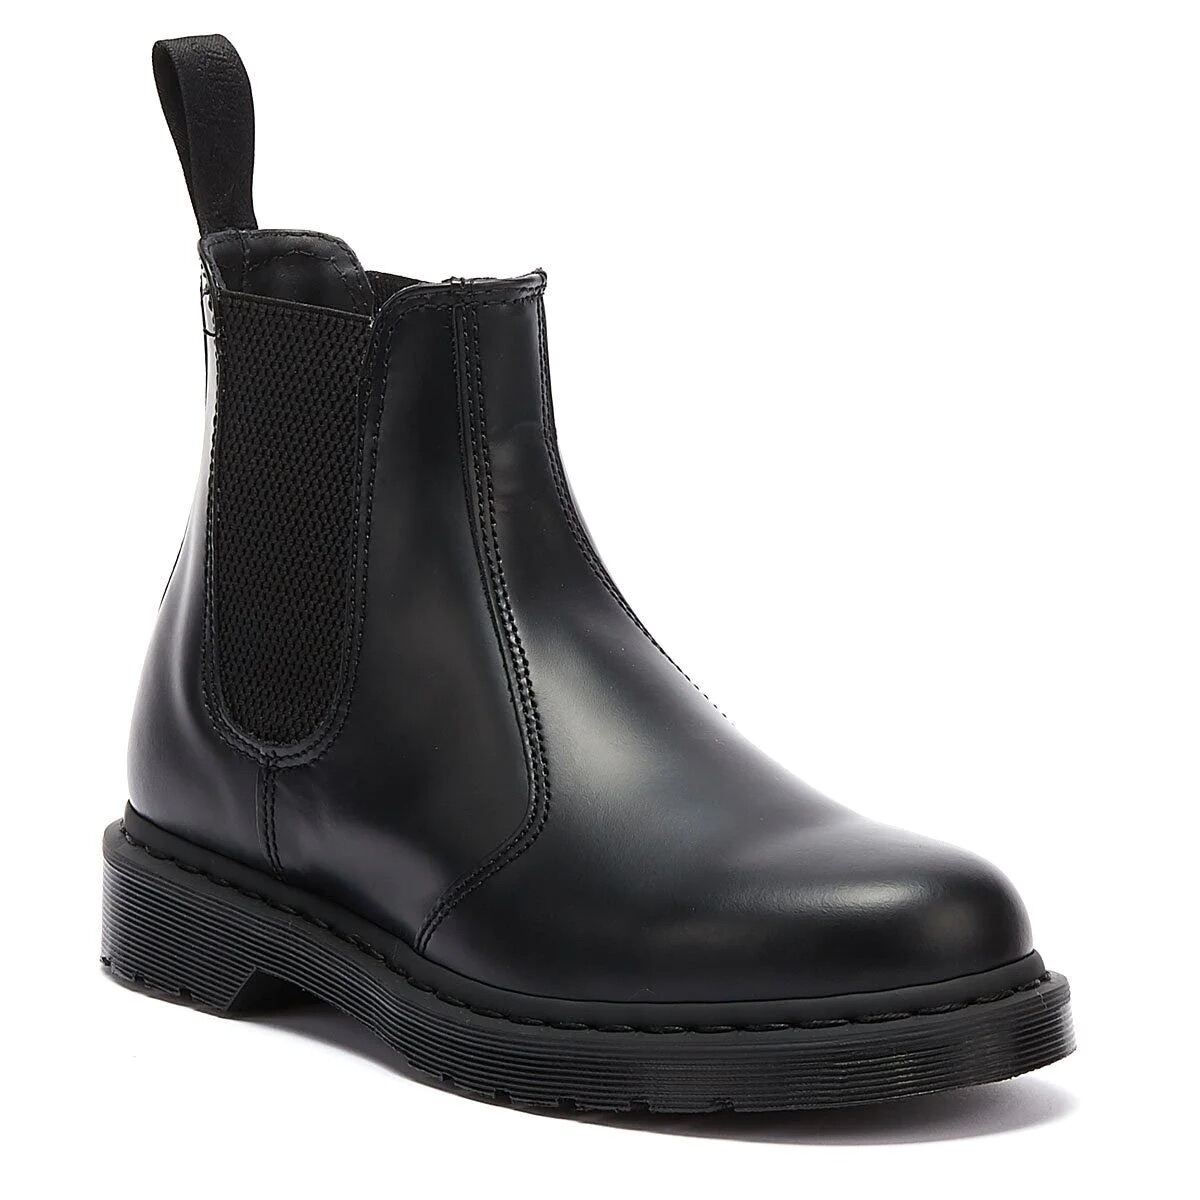 GIÀY CAO CỔ 2976 MONO SMOOTH LEATHER CHELSEA BOOTS 25685001